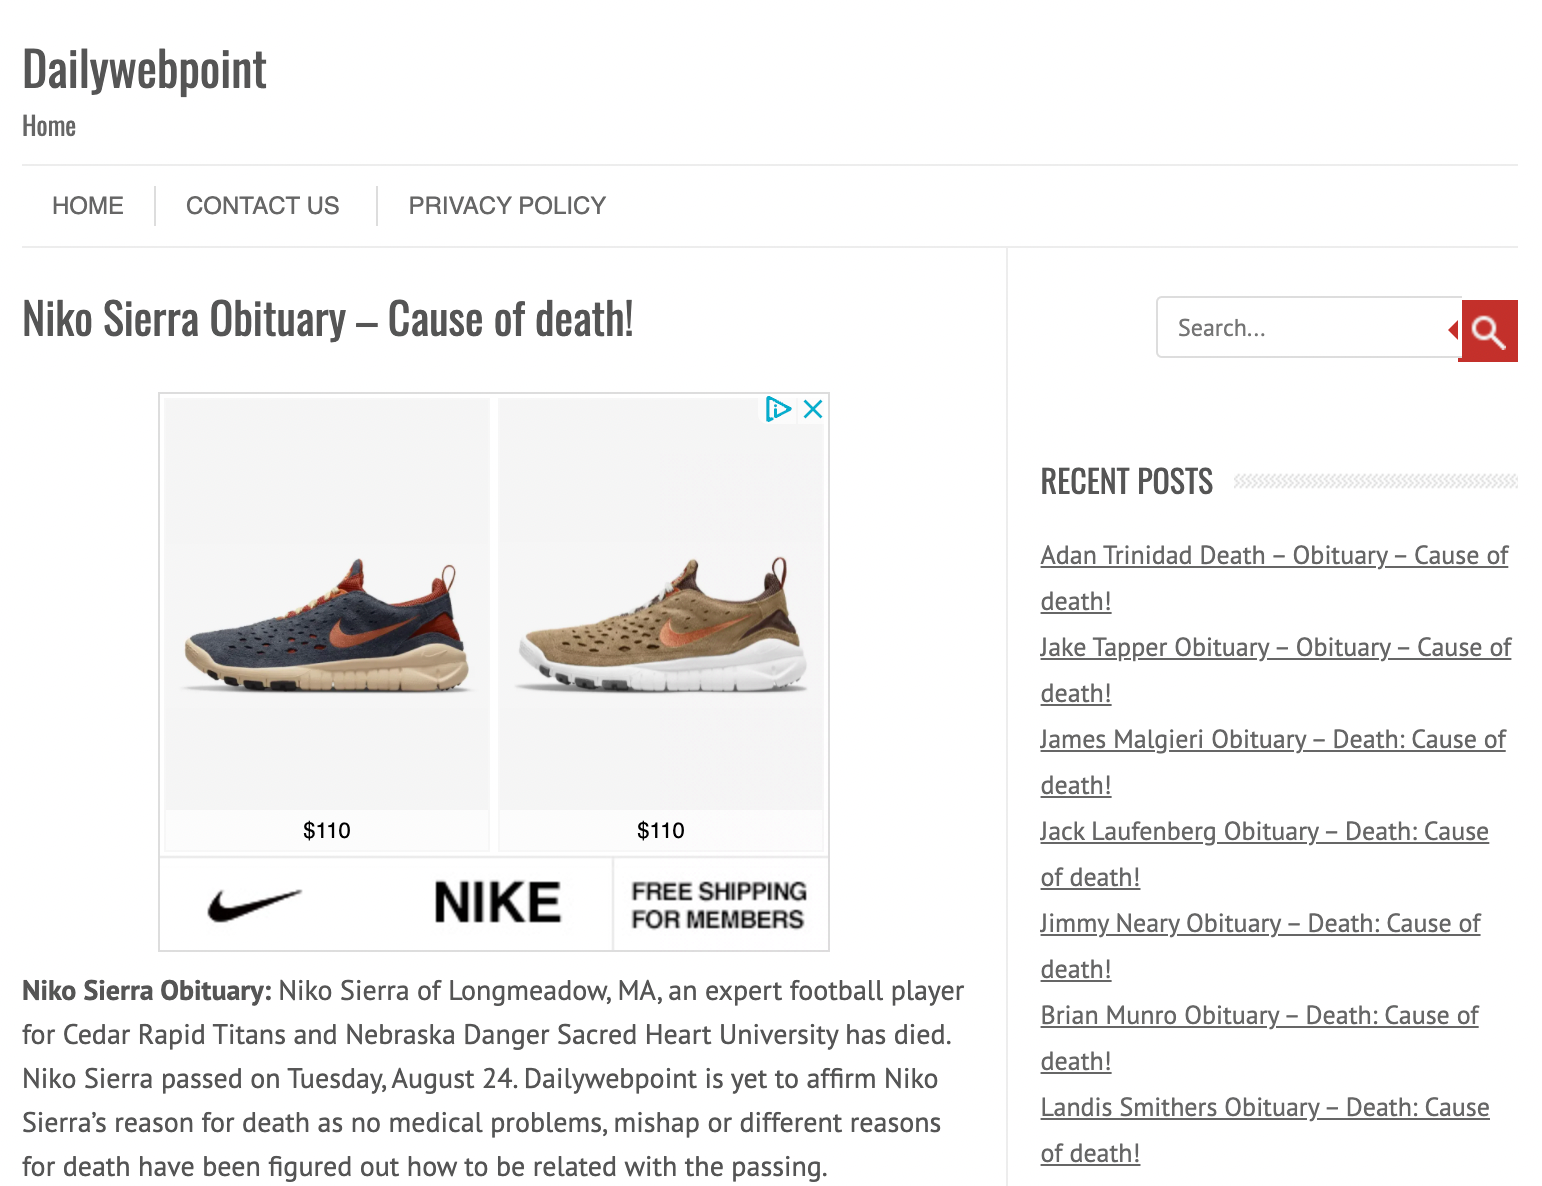 a Nike ad on a fake obit site